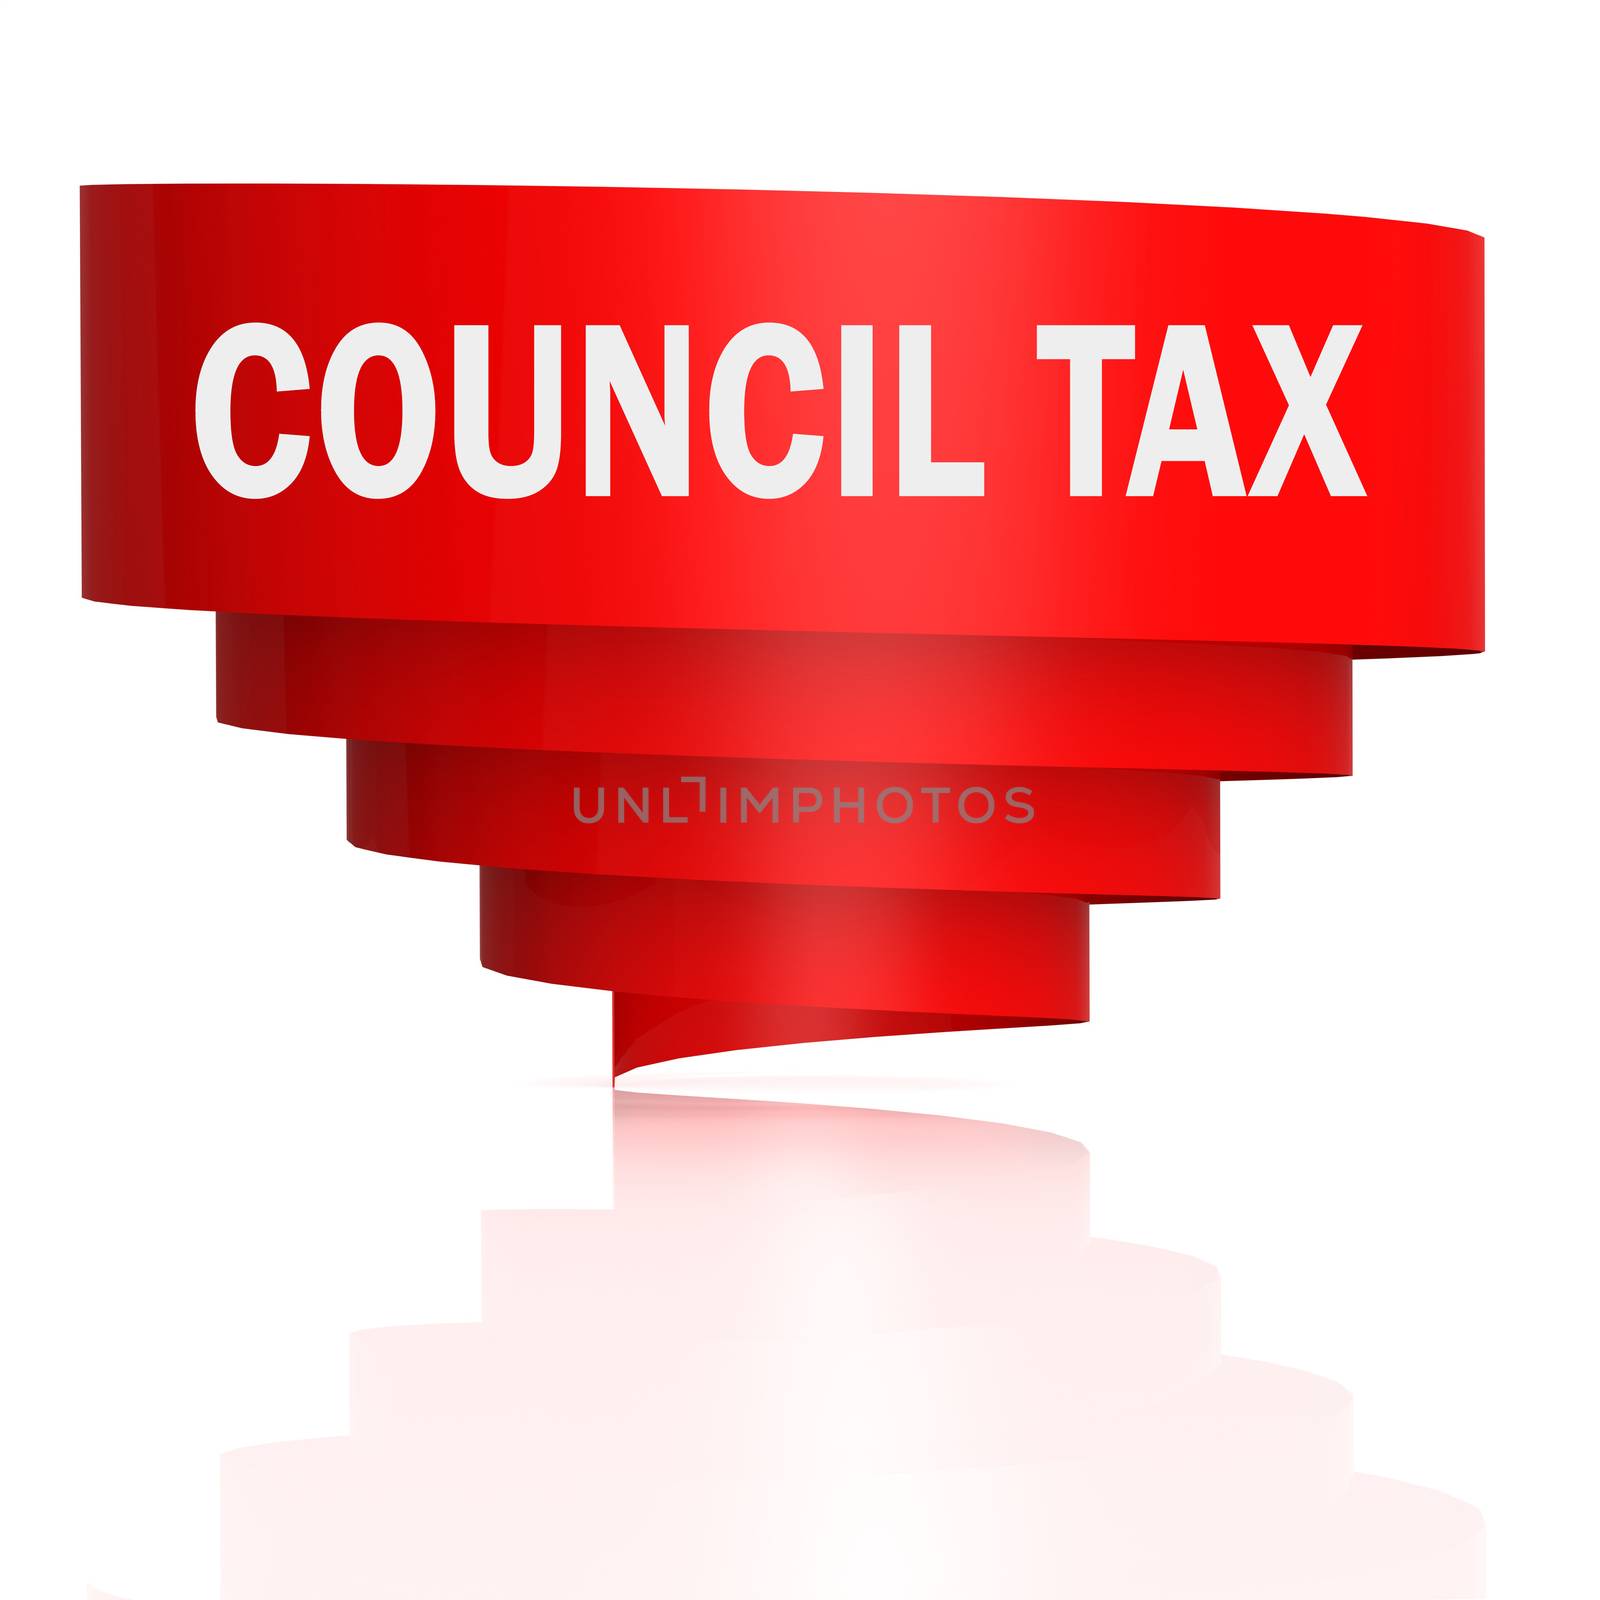 Council tax word with curve banner by tang90246